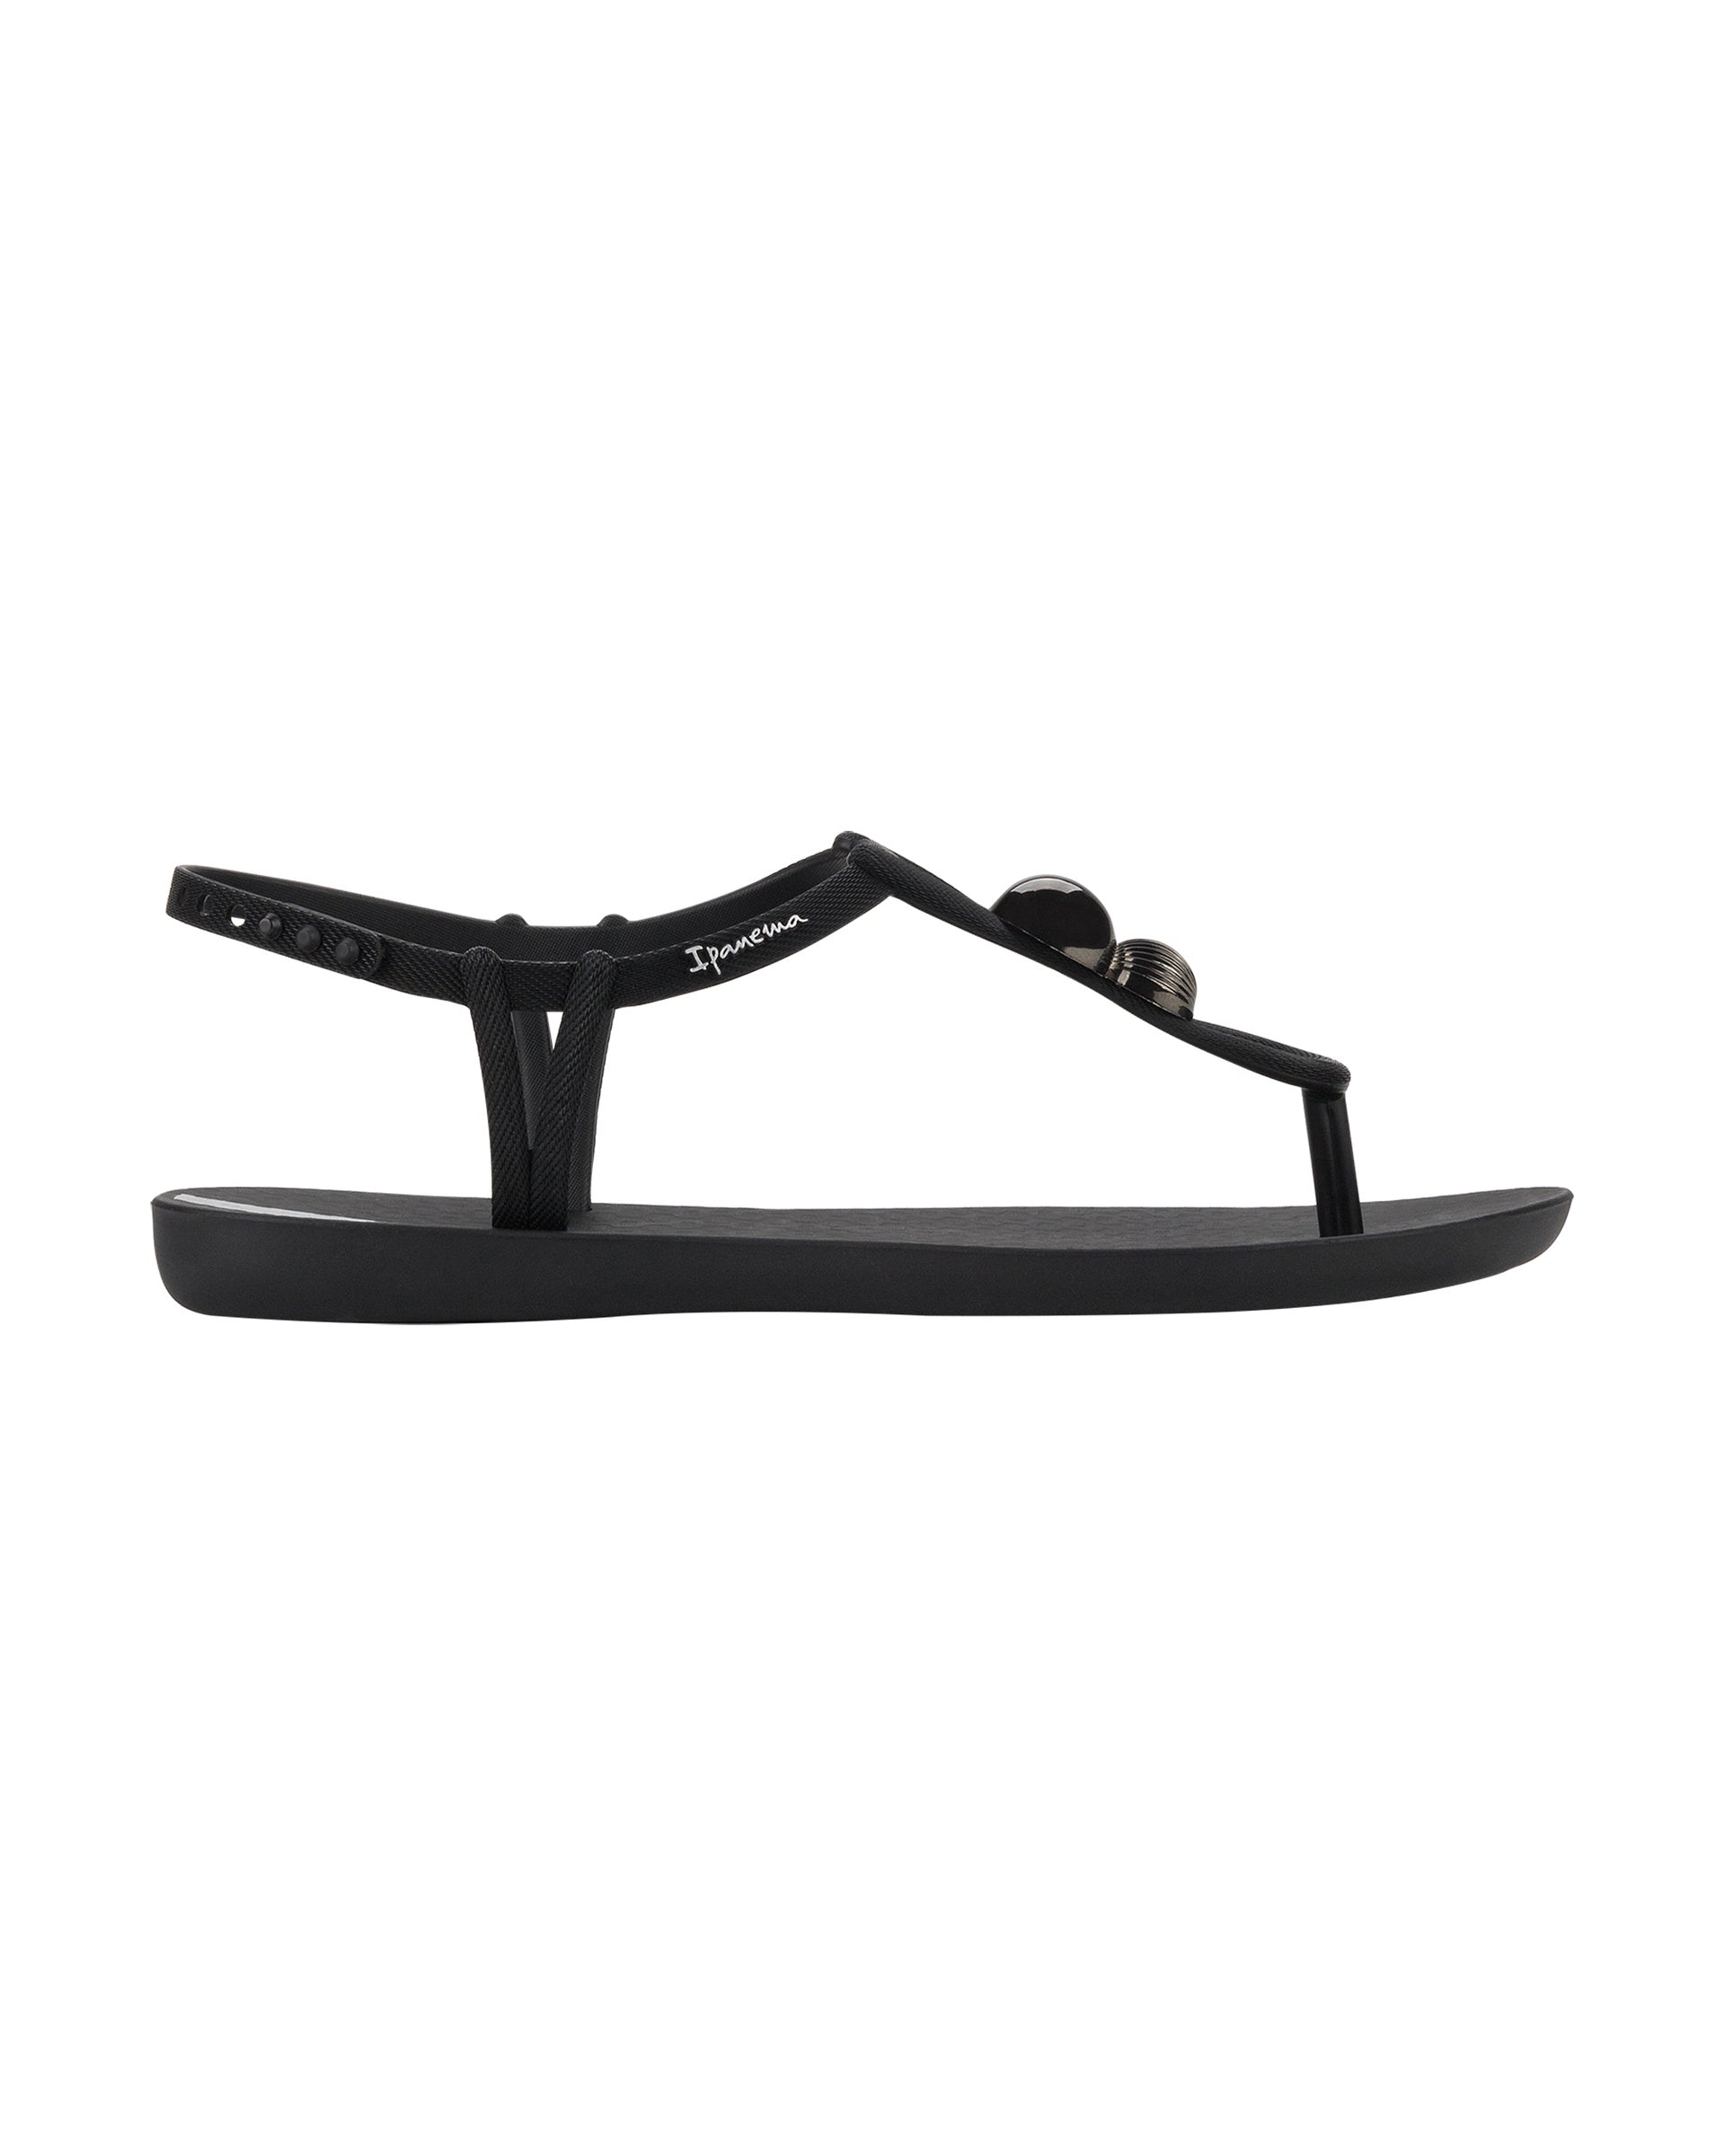 Outer side view of a black Ipanema Class Spheres women's t-strap sandal with metallic bauble.